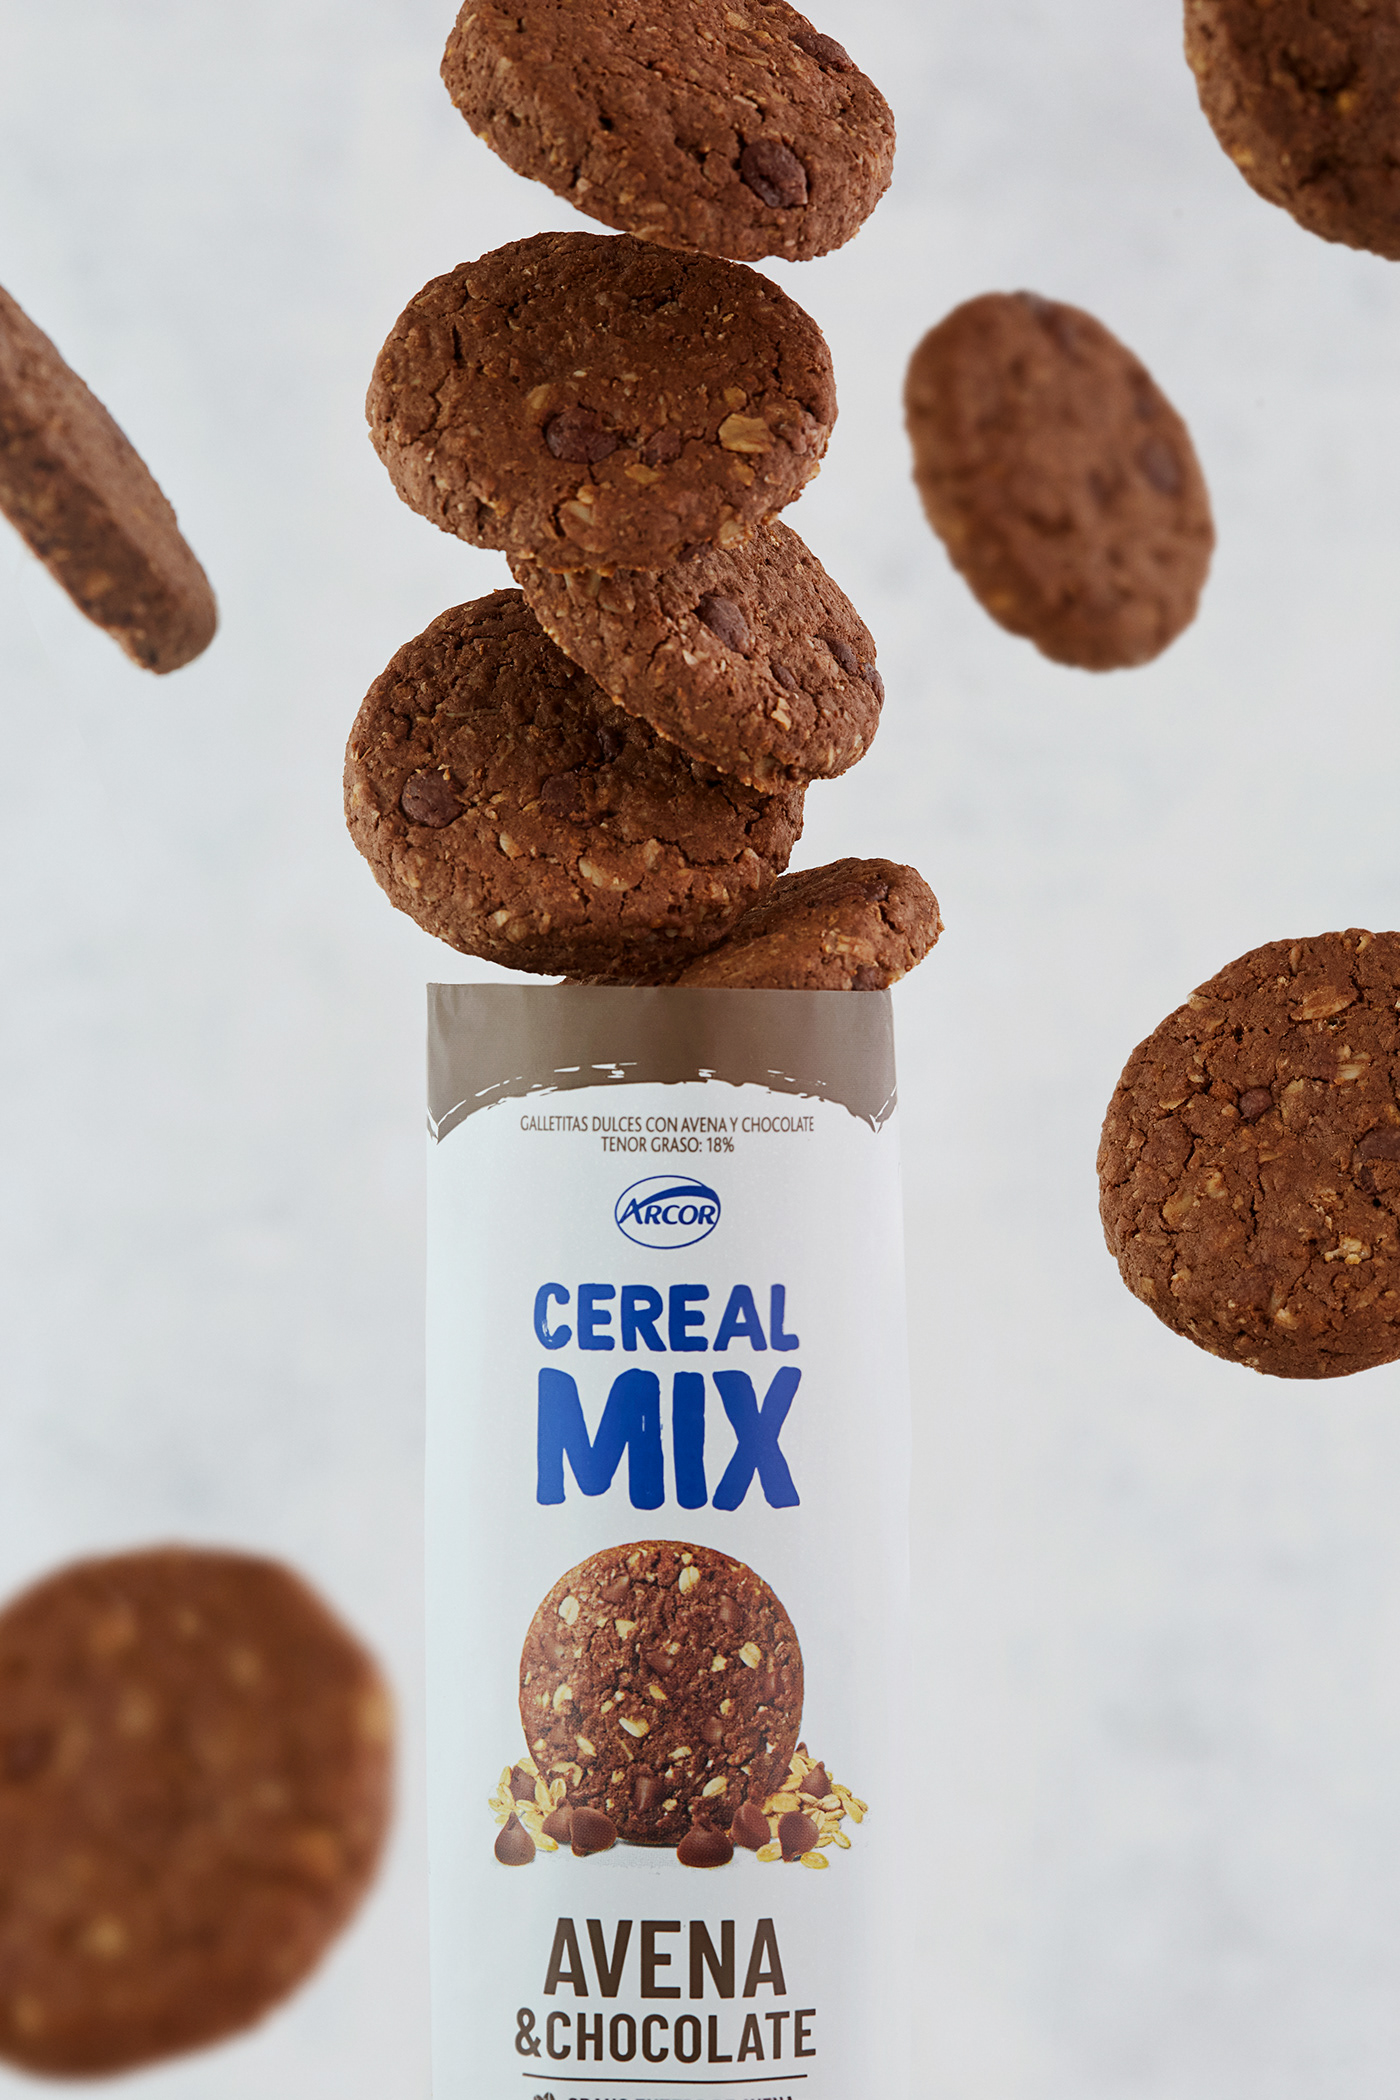 Advertising  barras de cereal food styling Photography  Product Photography